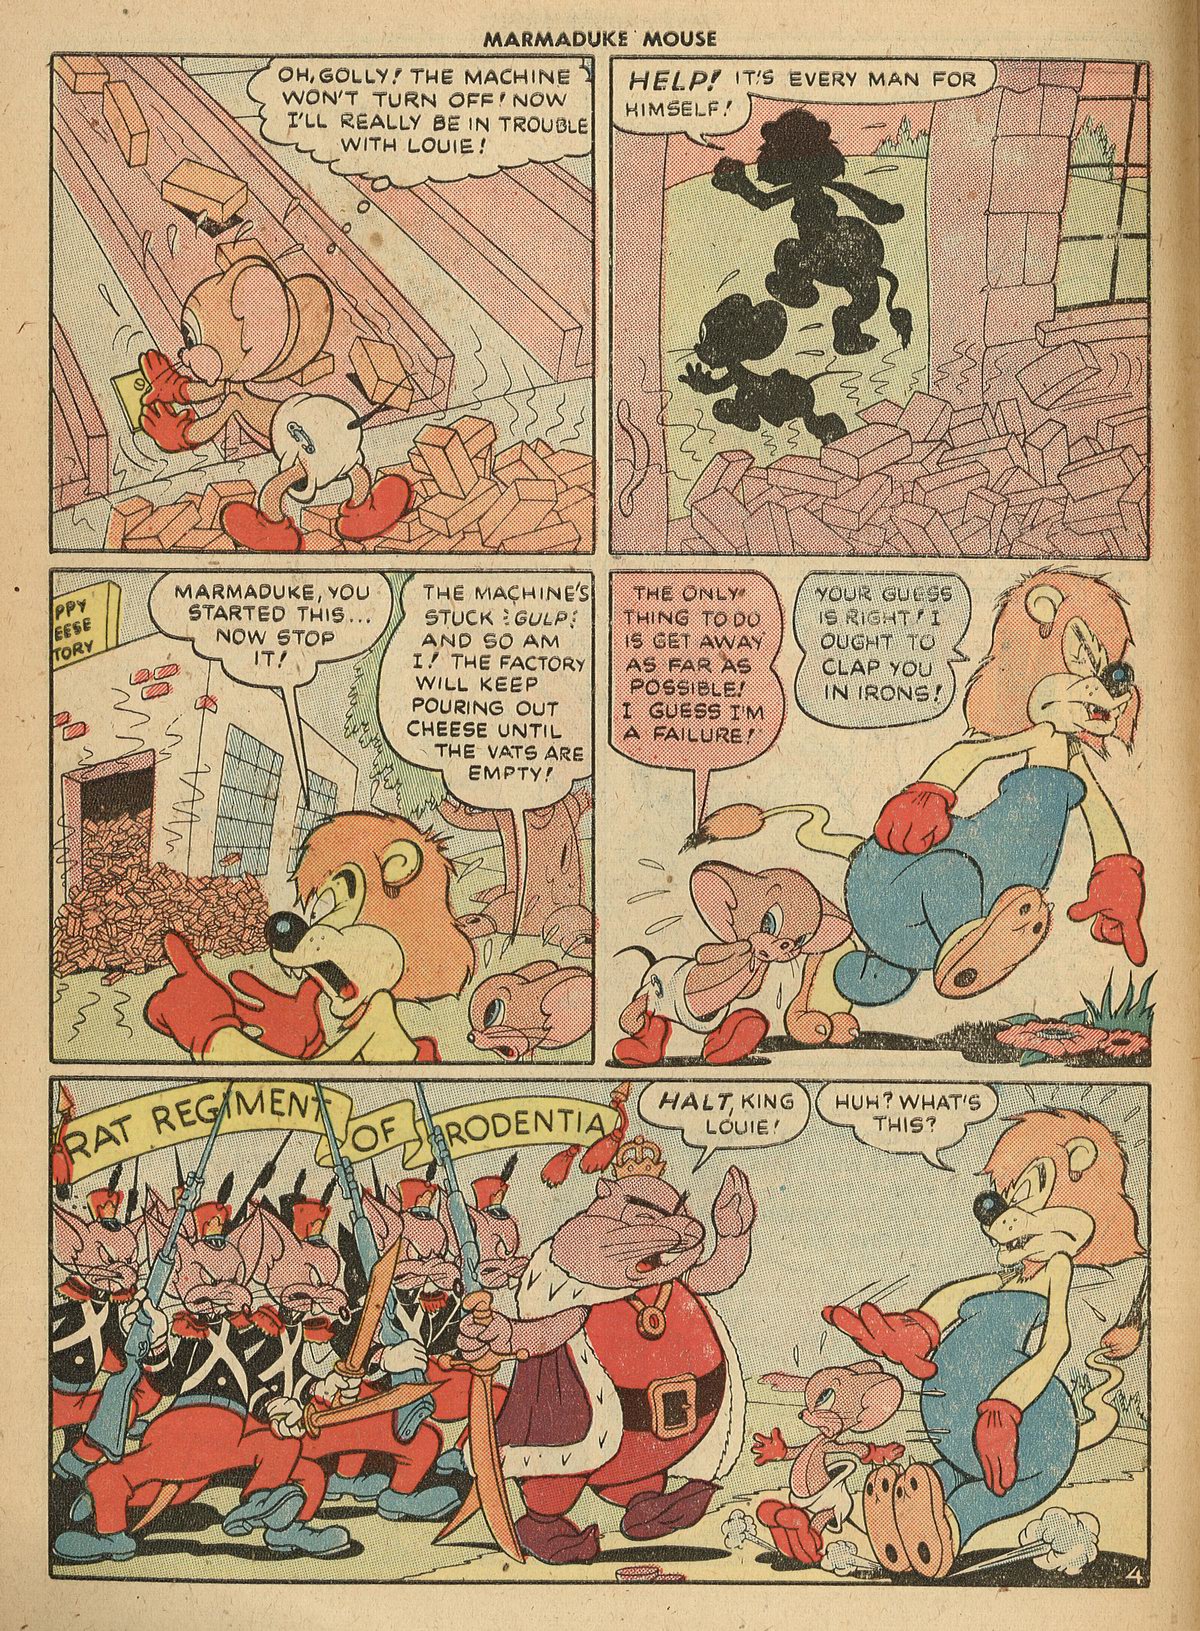 Read online Marmaduke Mouse comic -  Issue #13 - 6